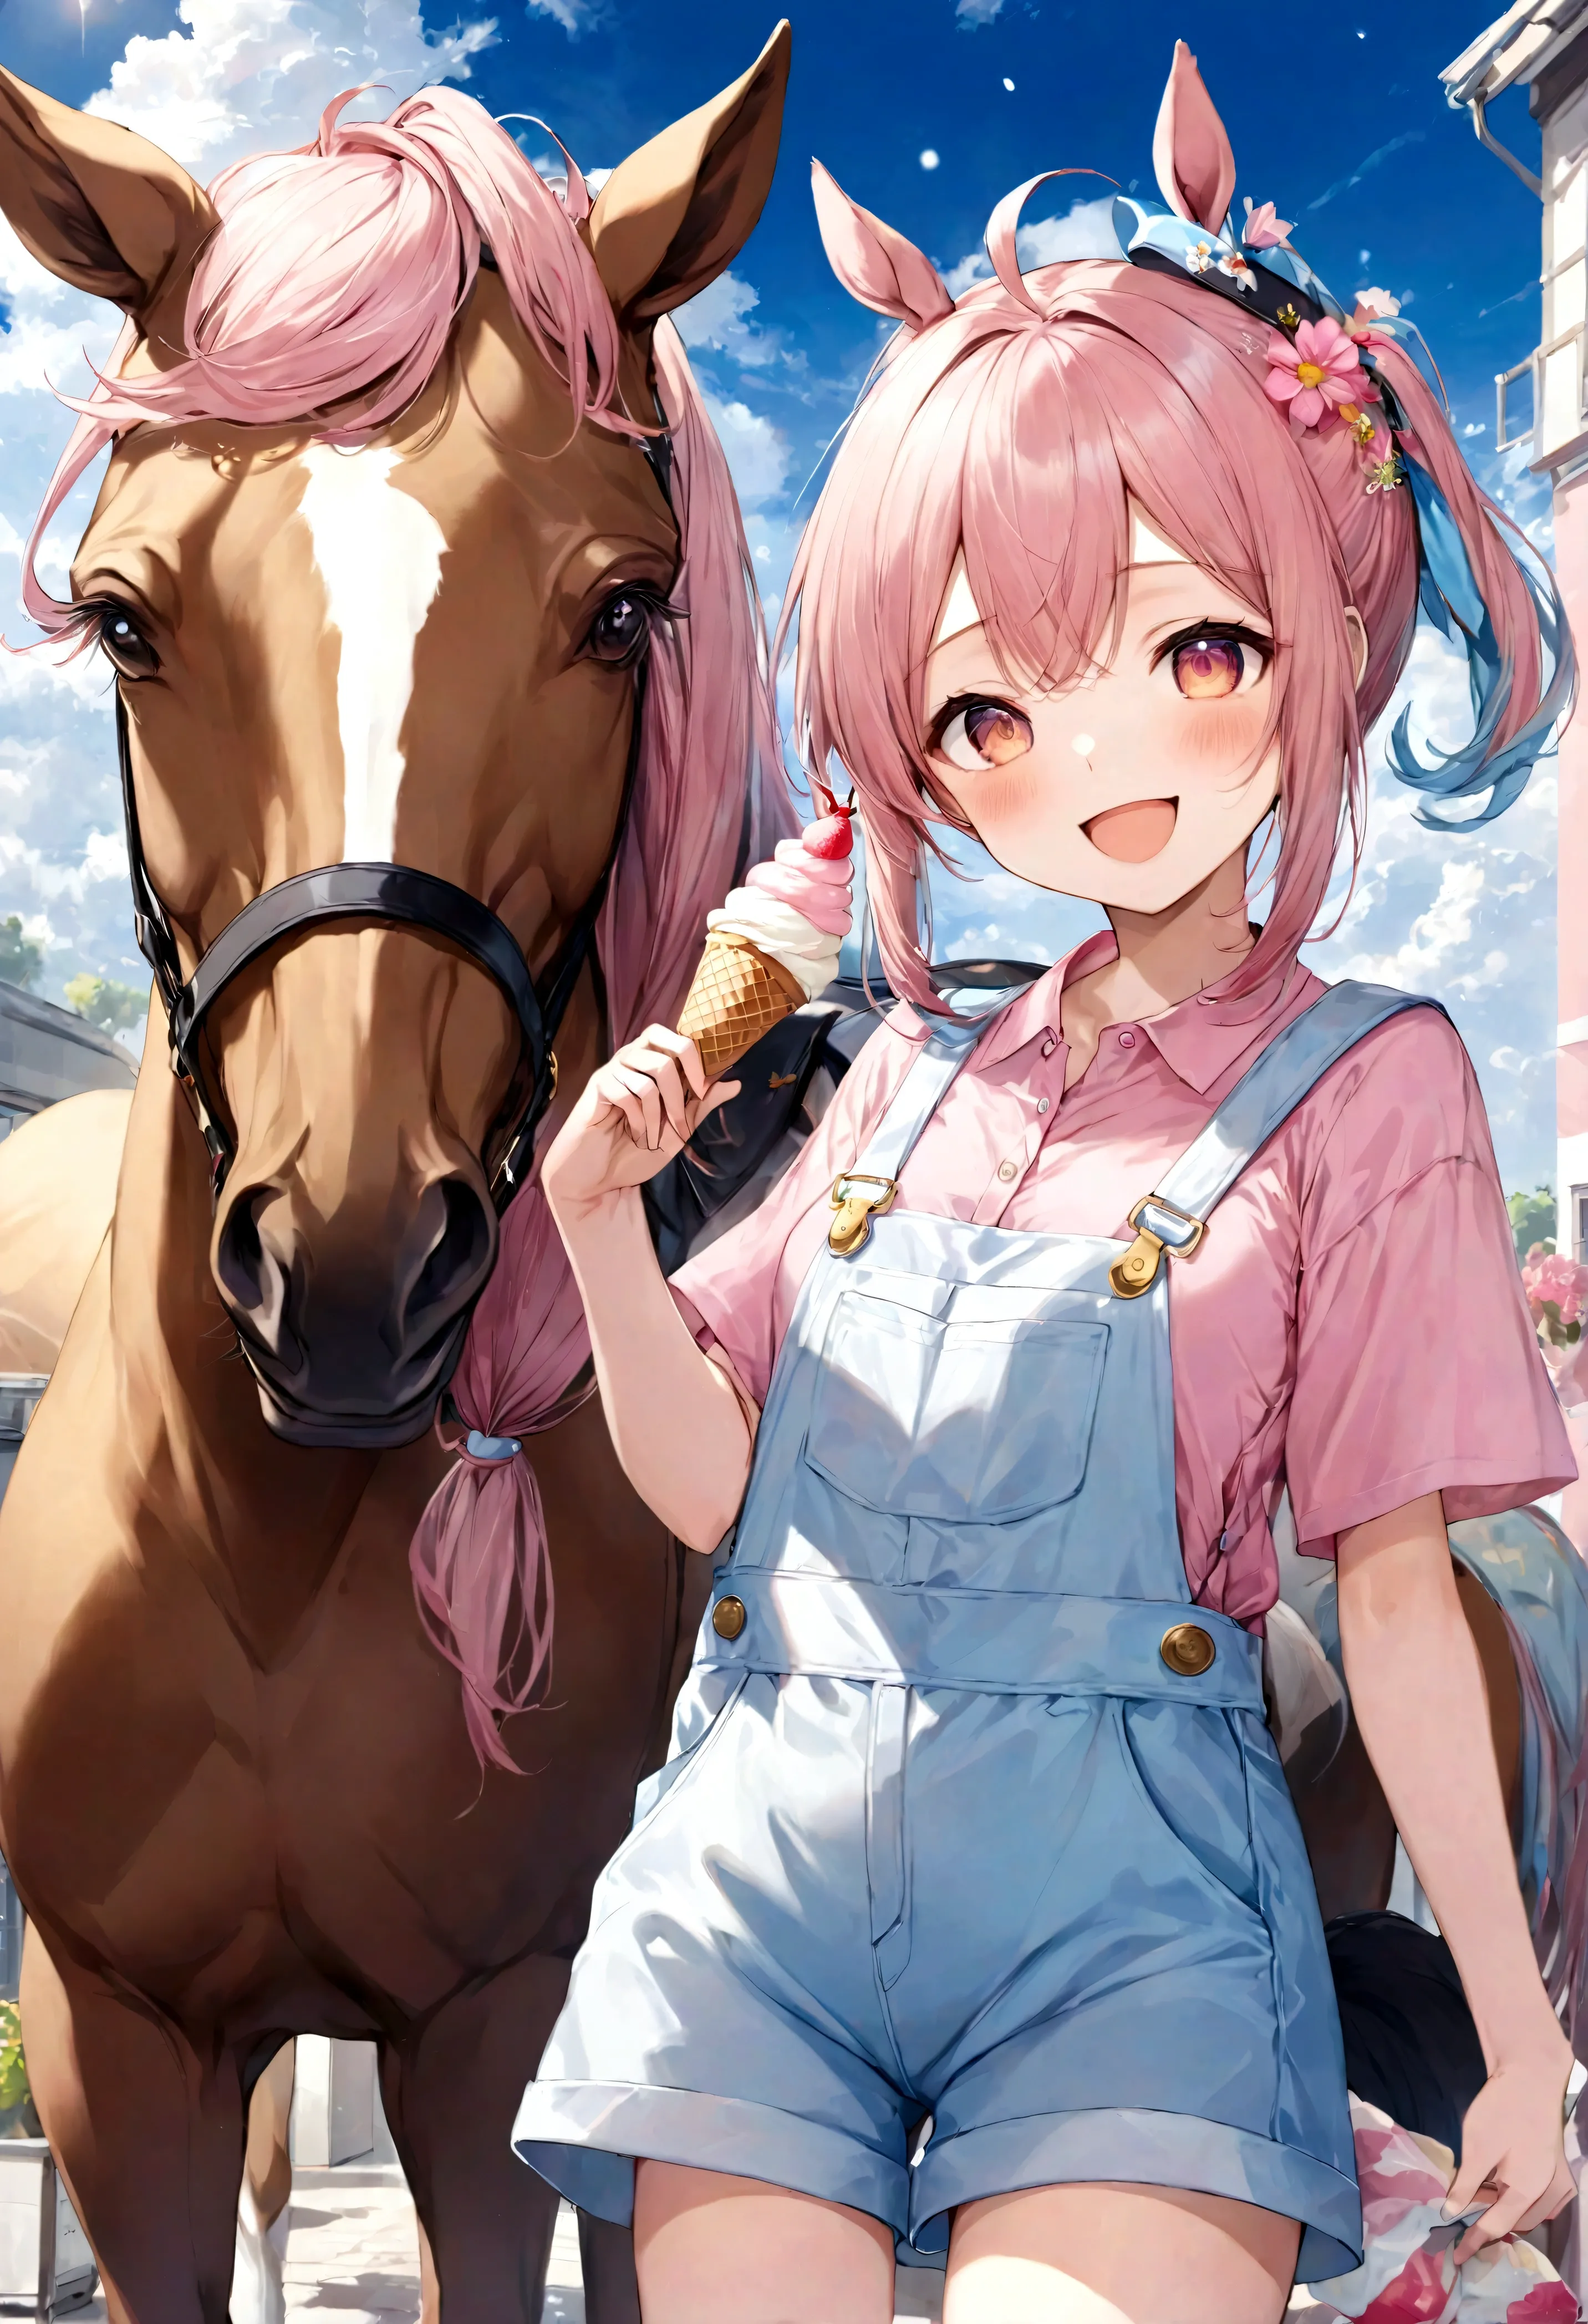 masterpiece、highest quality、1girl、solo、Haruurara、Oversized Overall Shorts、Pink Shirt、ice cream cone、Horse tail accessories(0.6)、Open-mouthed and smiling broadly、Surrounded by a cloudy background、Flower-shaped pupils sparkle。